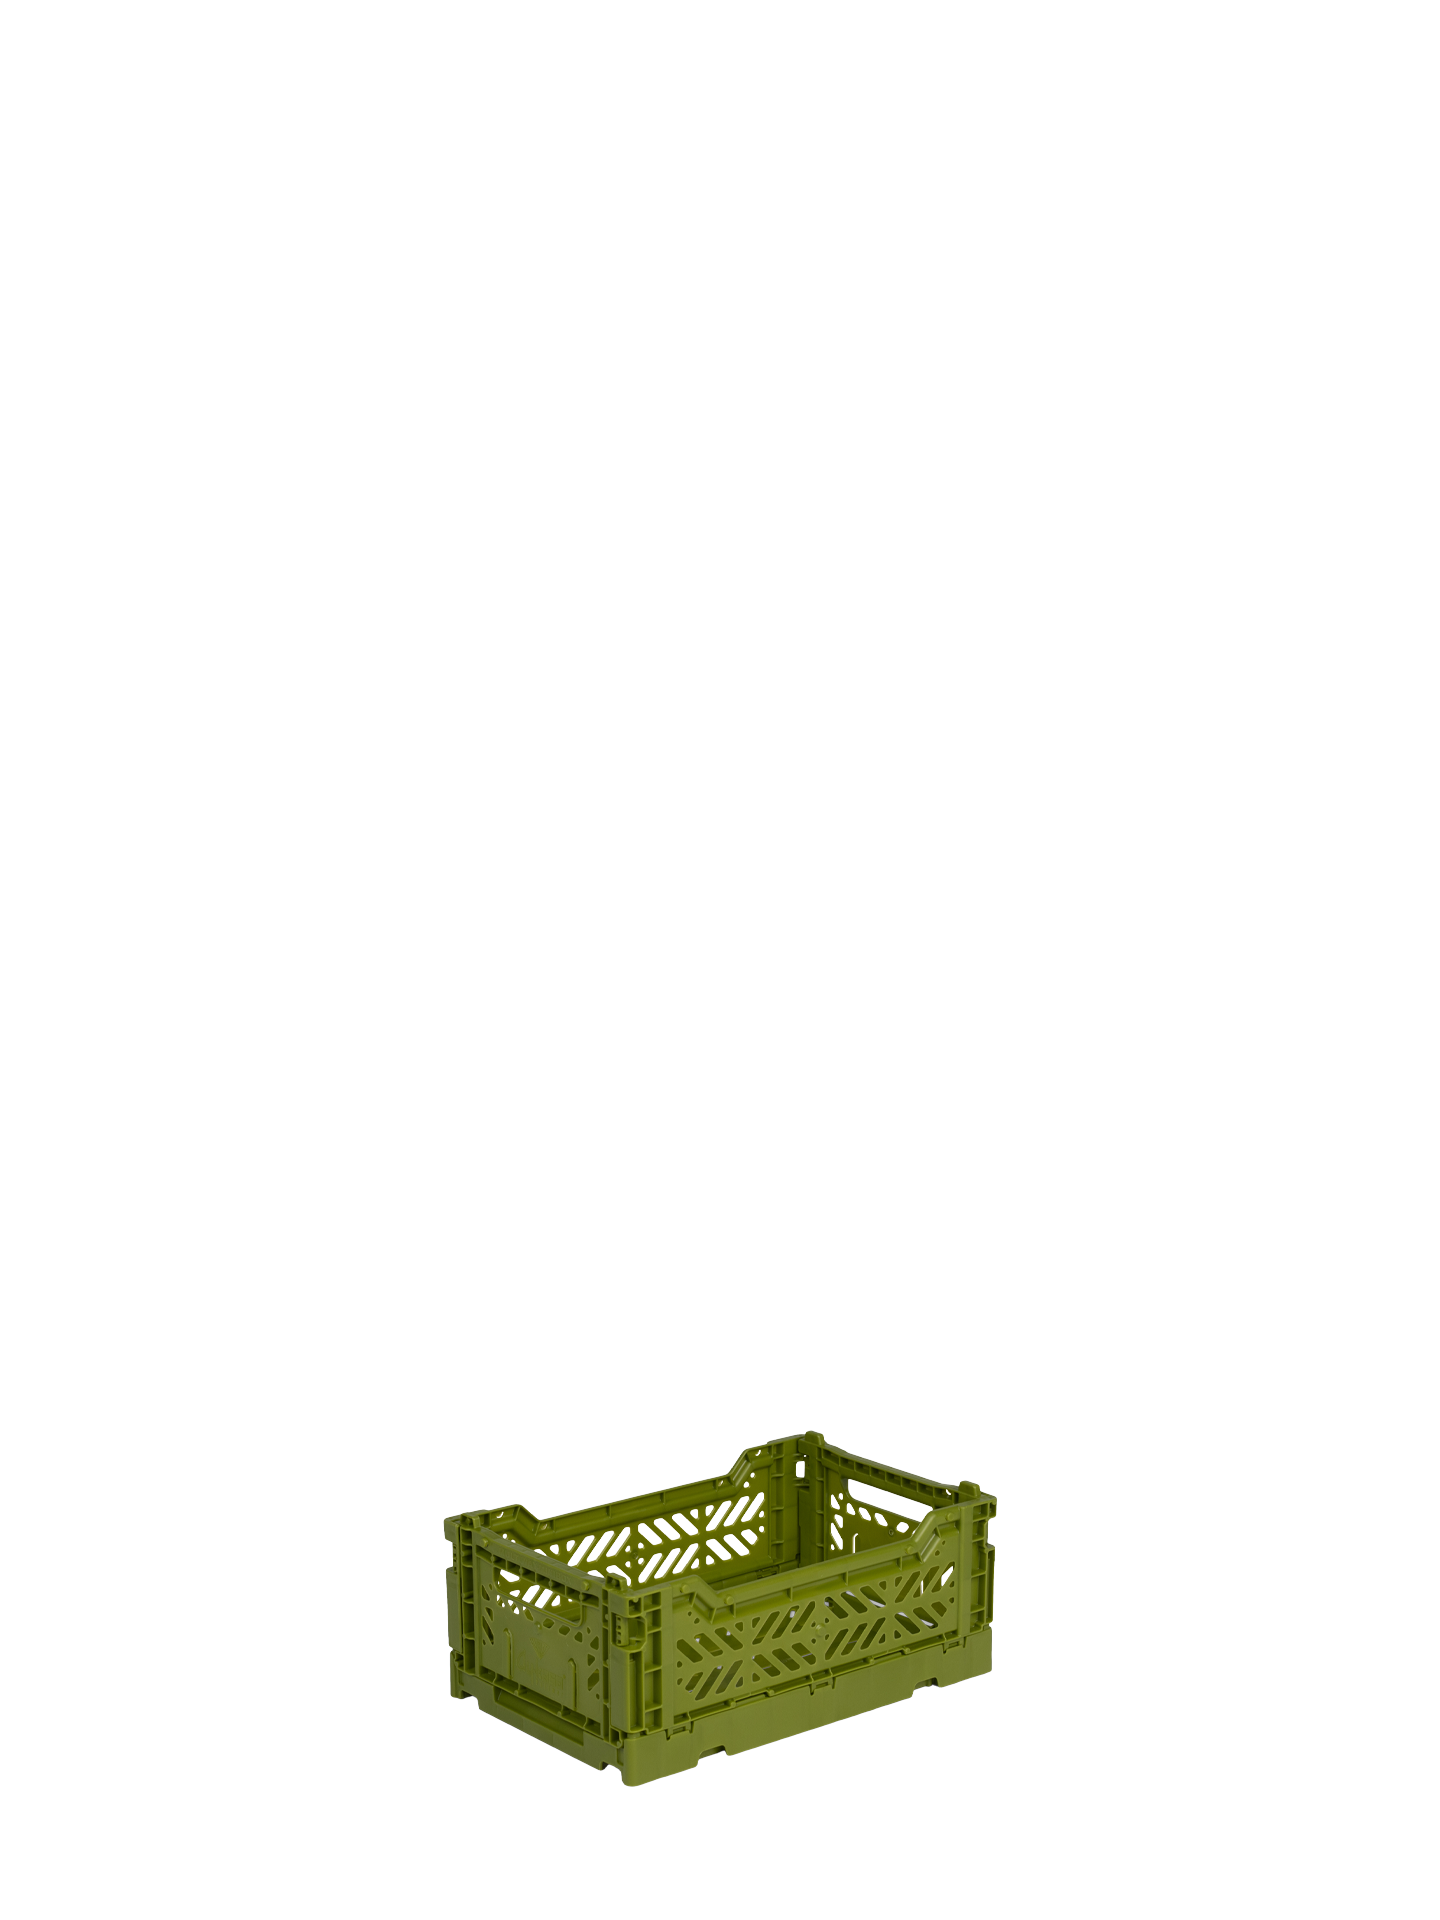 Mini Aykasa crate in olive green stacks and folds